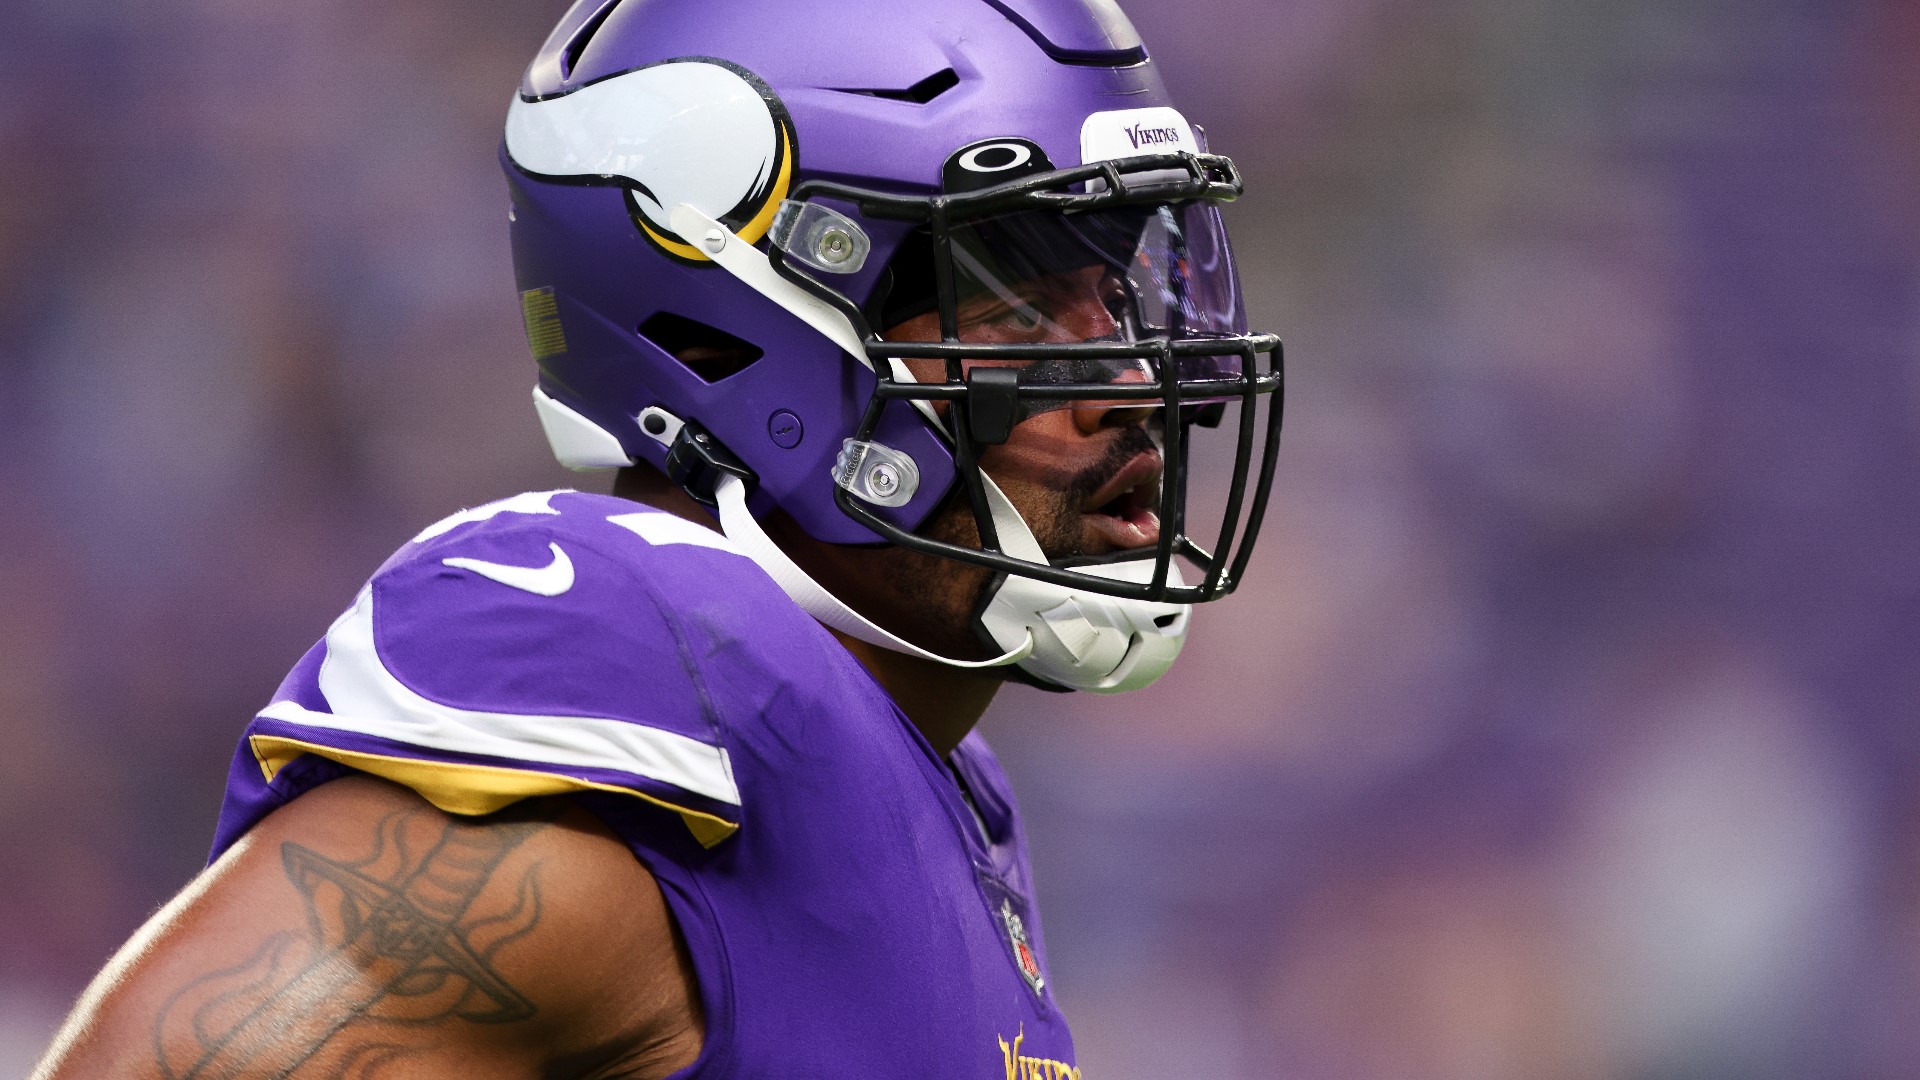 Ex-Viking Everson Griffen charged with DUI, reckless driving after traffic stop in Chanhassen